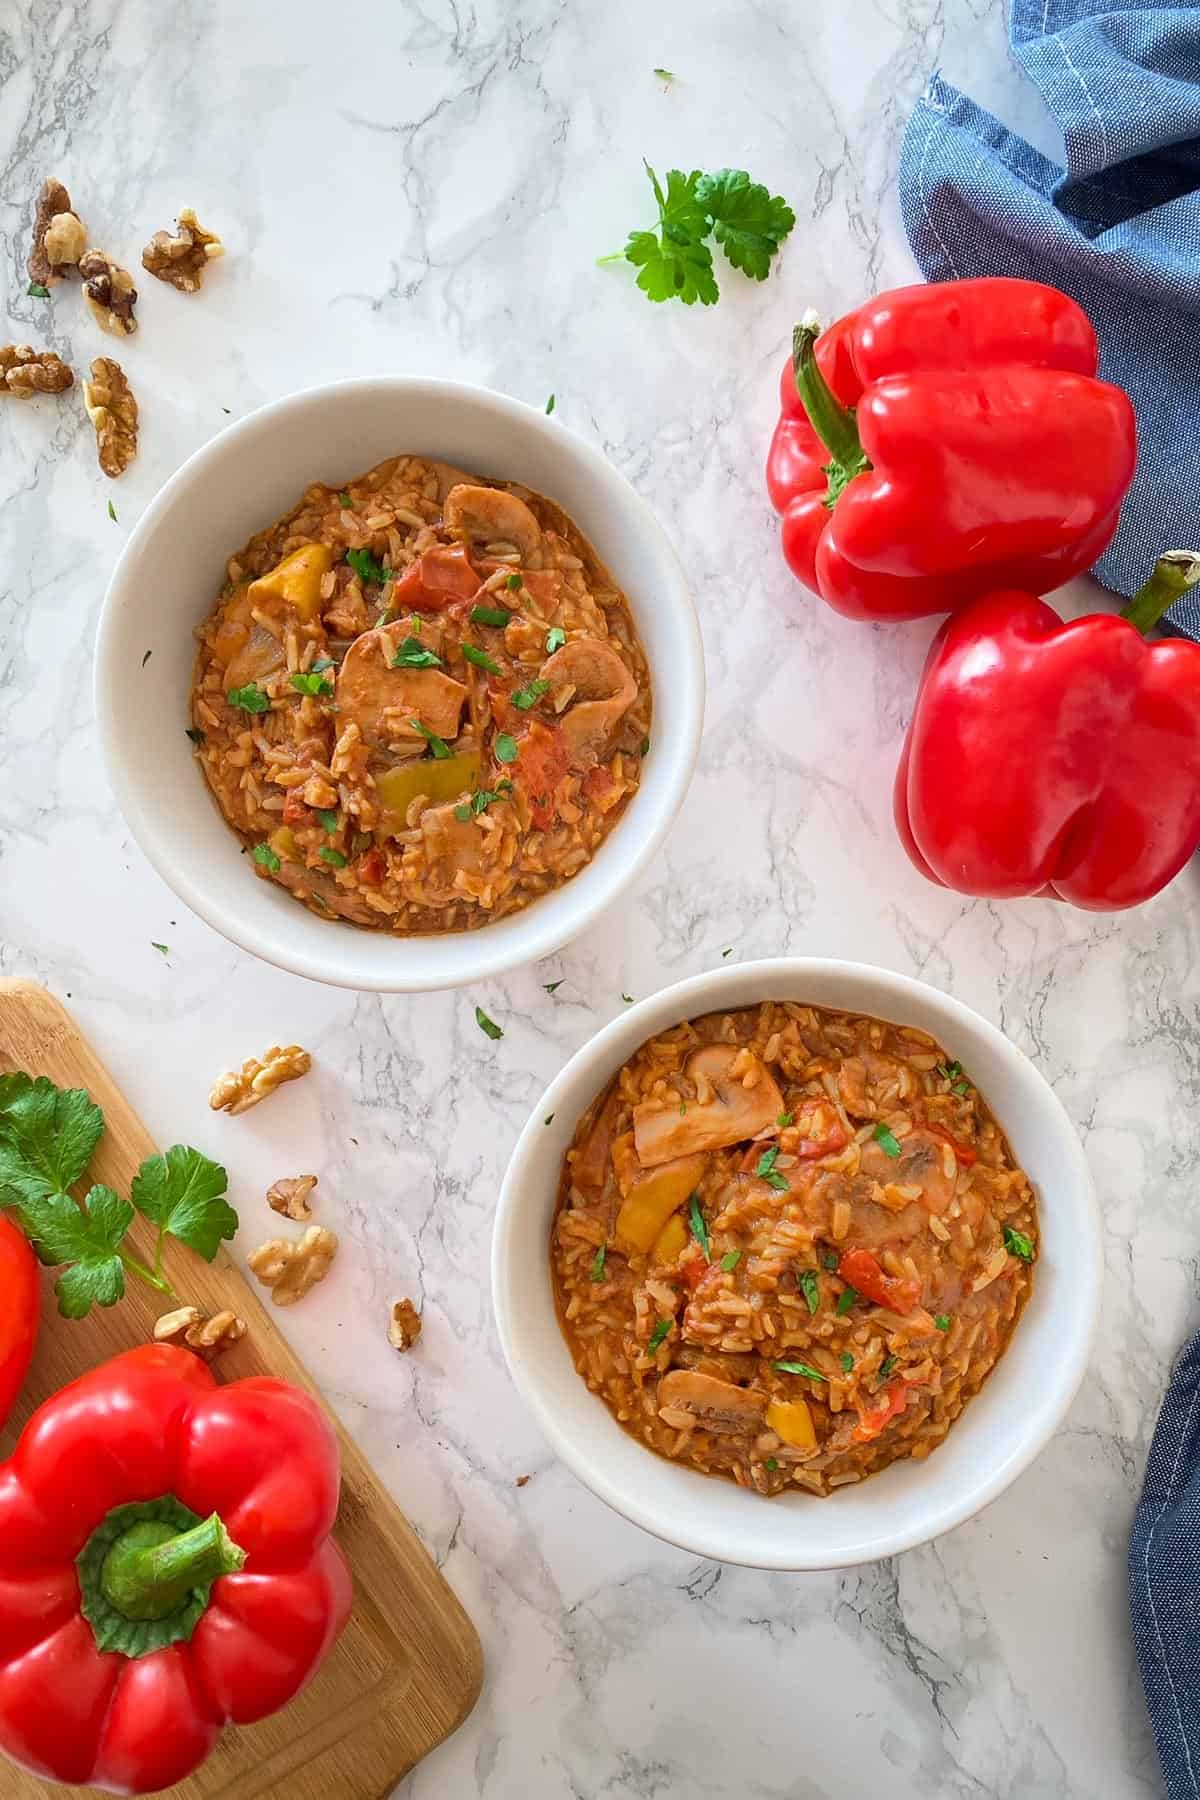 Two bowls filled with rice, mushrooms, peppers in a tomato base sauce with parsley garnish.